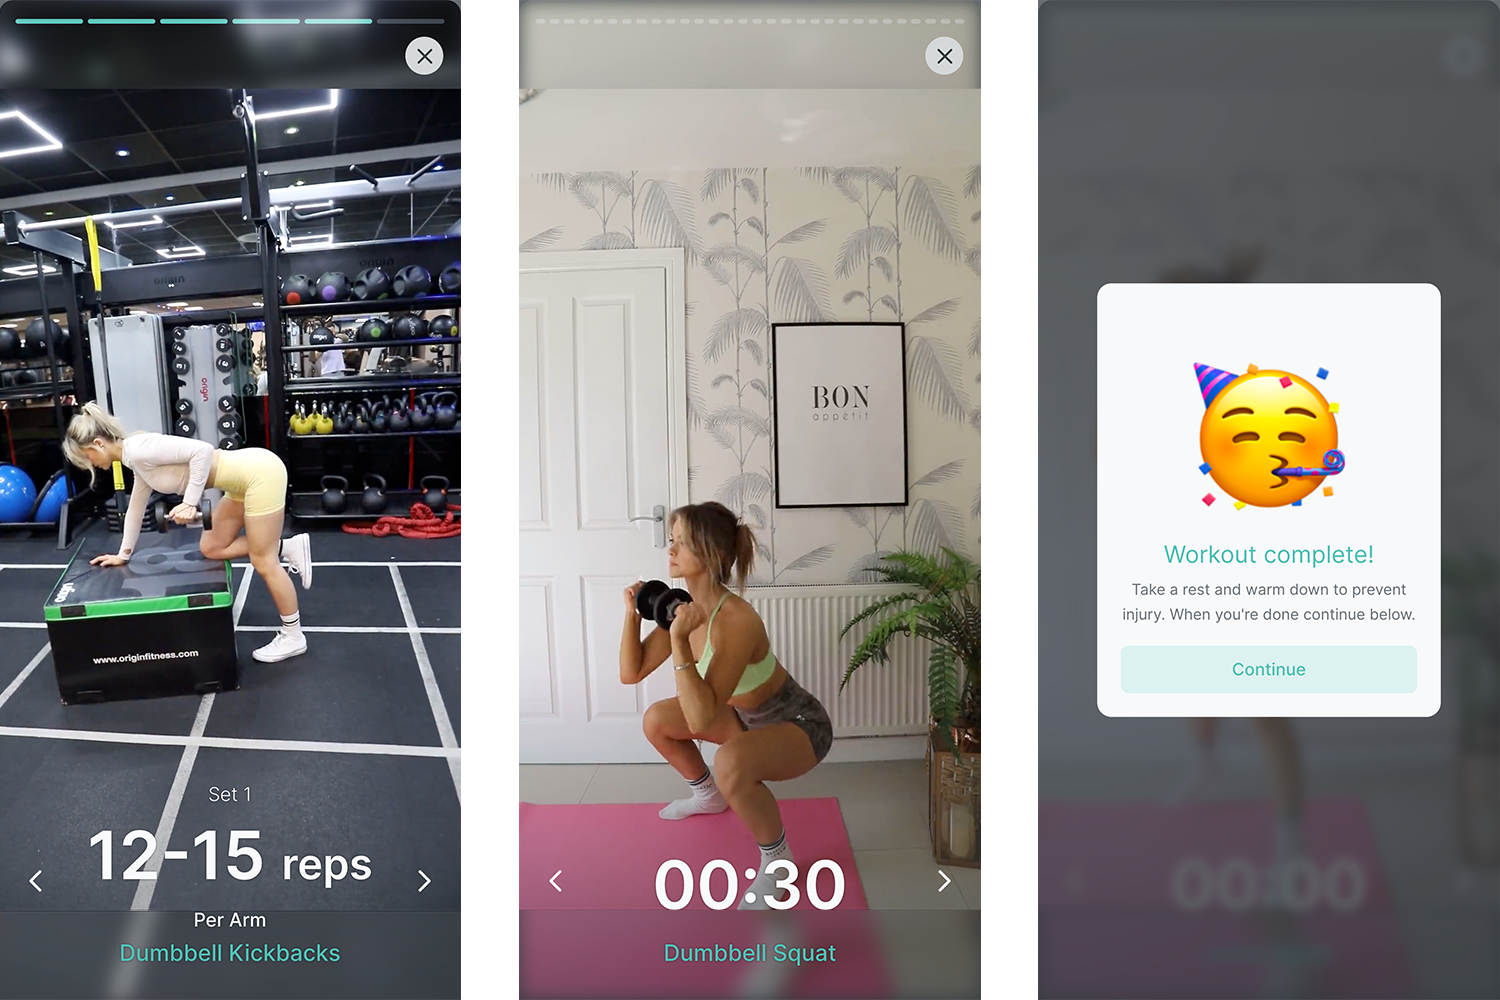 Interactive workout UI based on Instagram's Stories